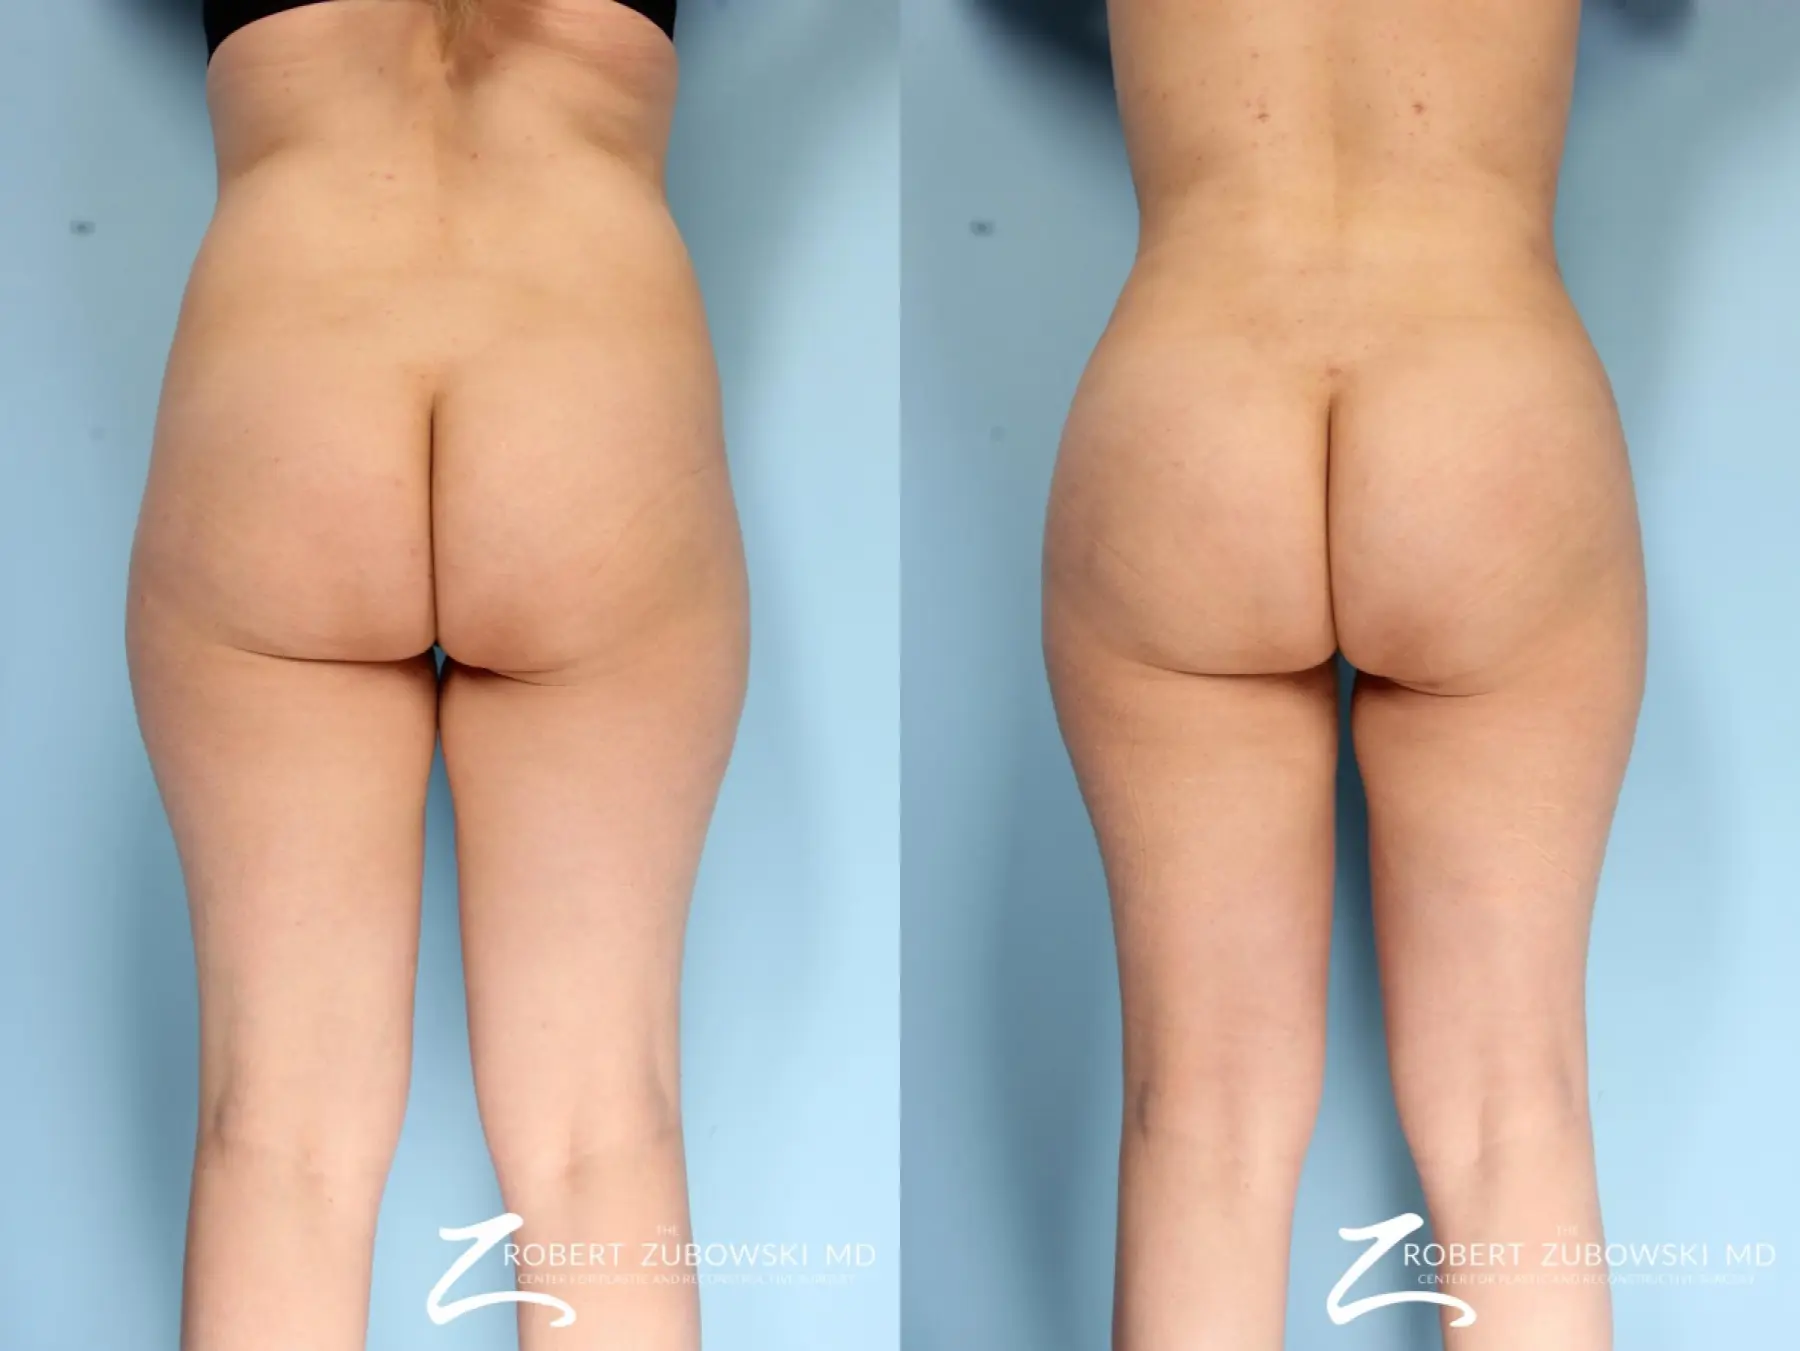 Butt Augmentation Before & After Gallery: Patient 3